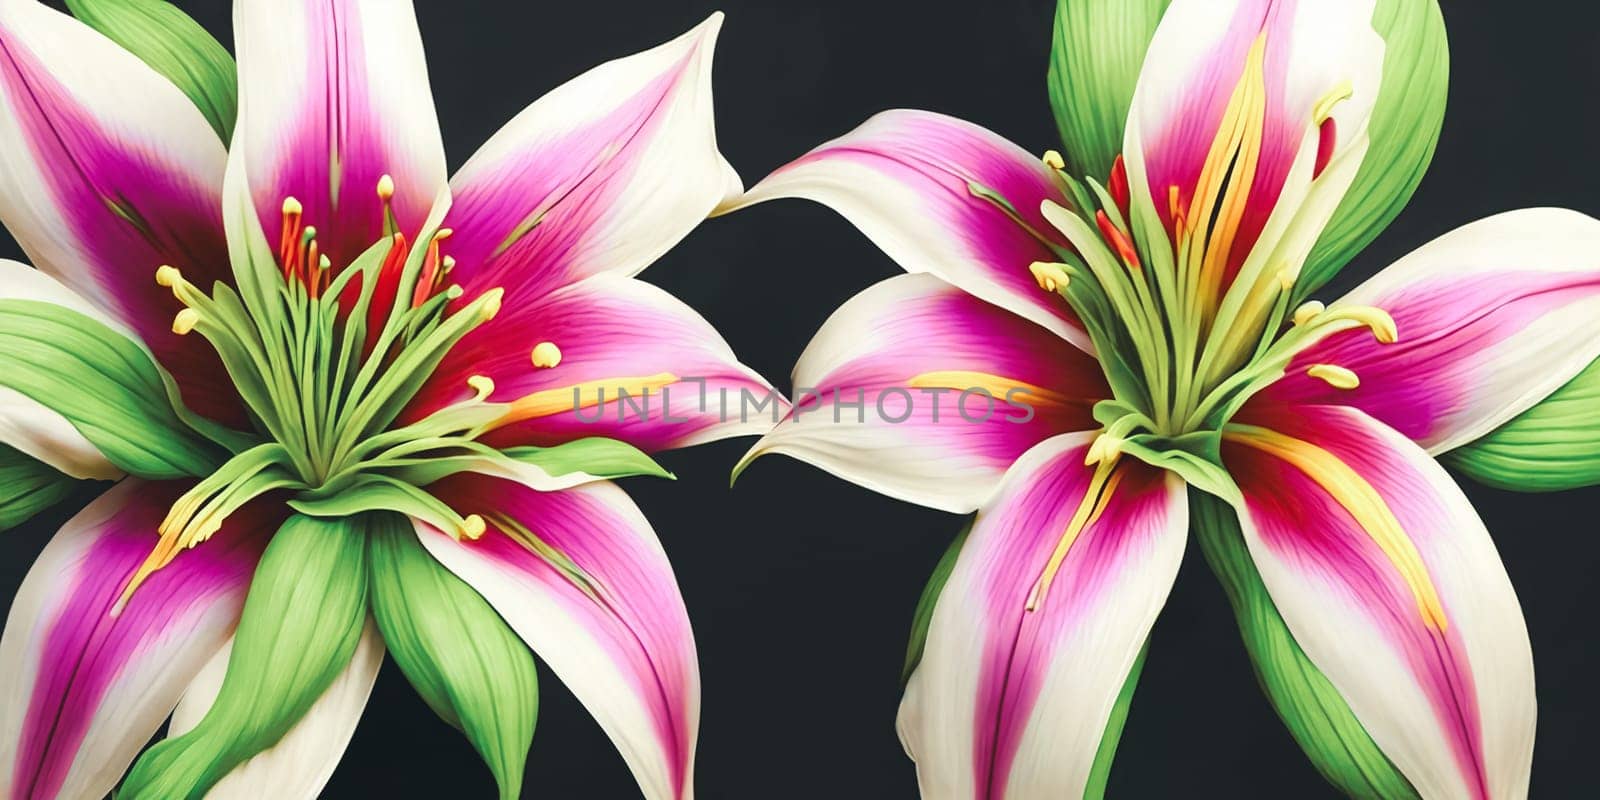 Beauty of symmetry by arranging an assortment of vibrant lilies. Panorama by GoodOlga